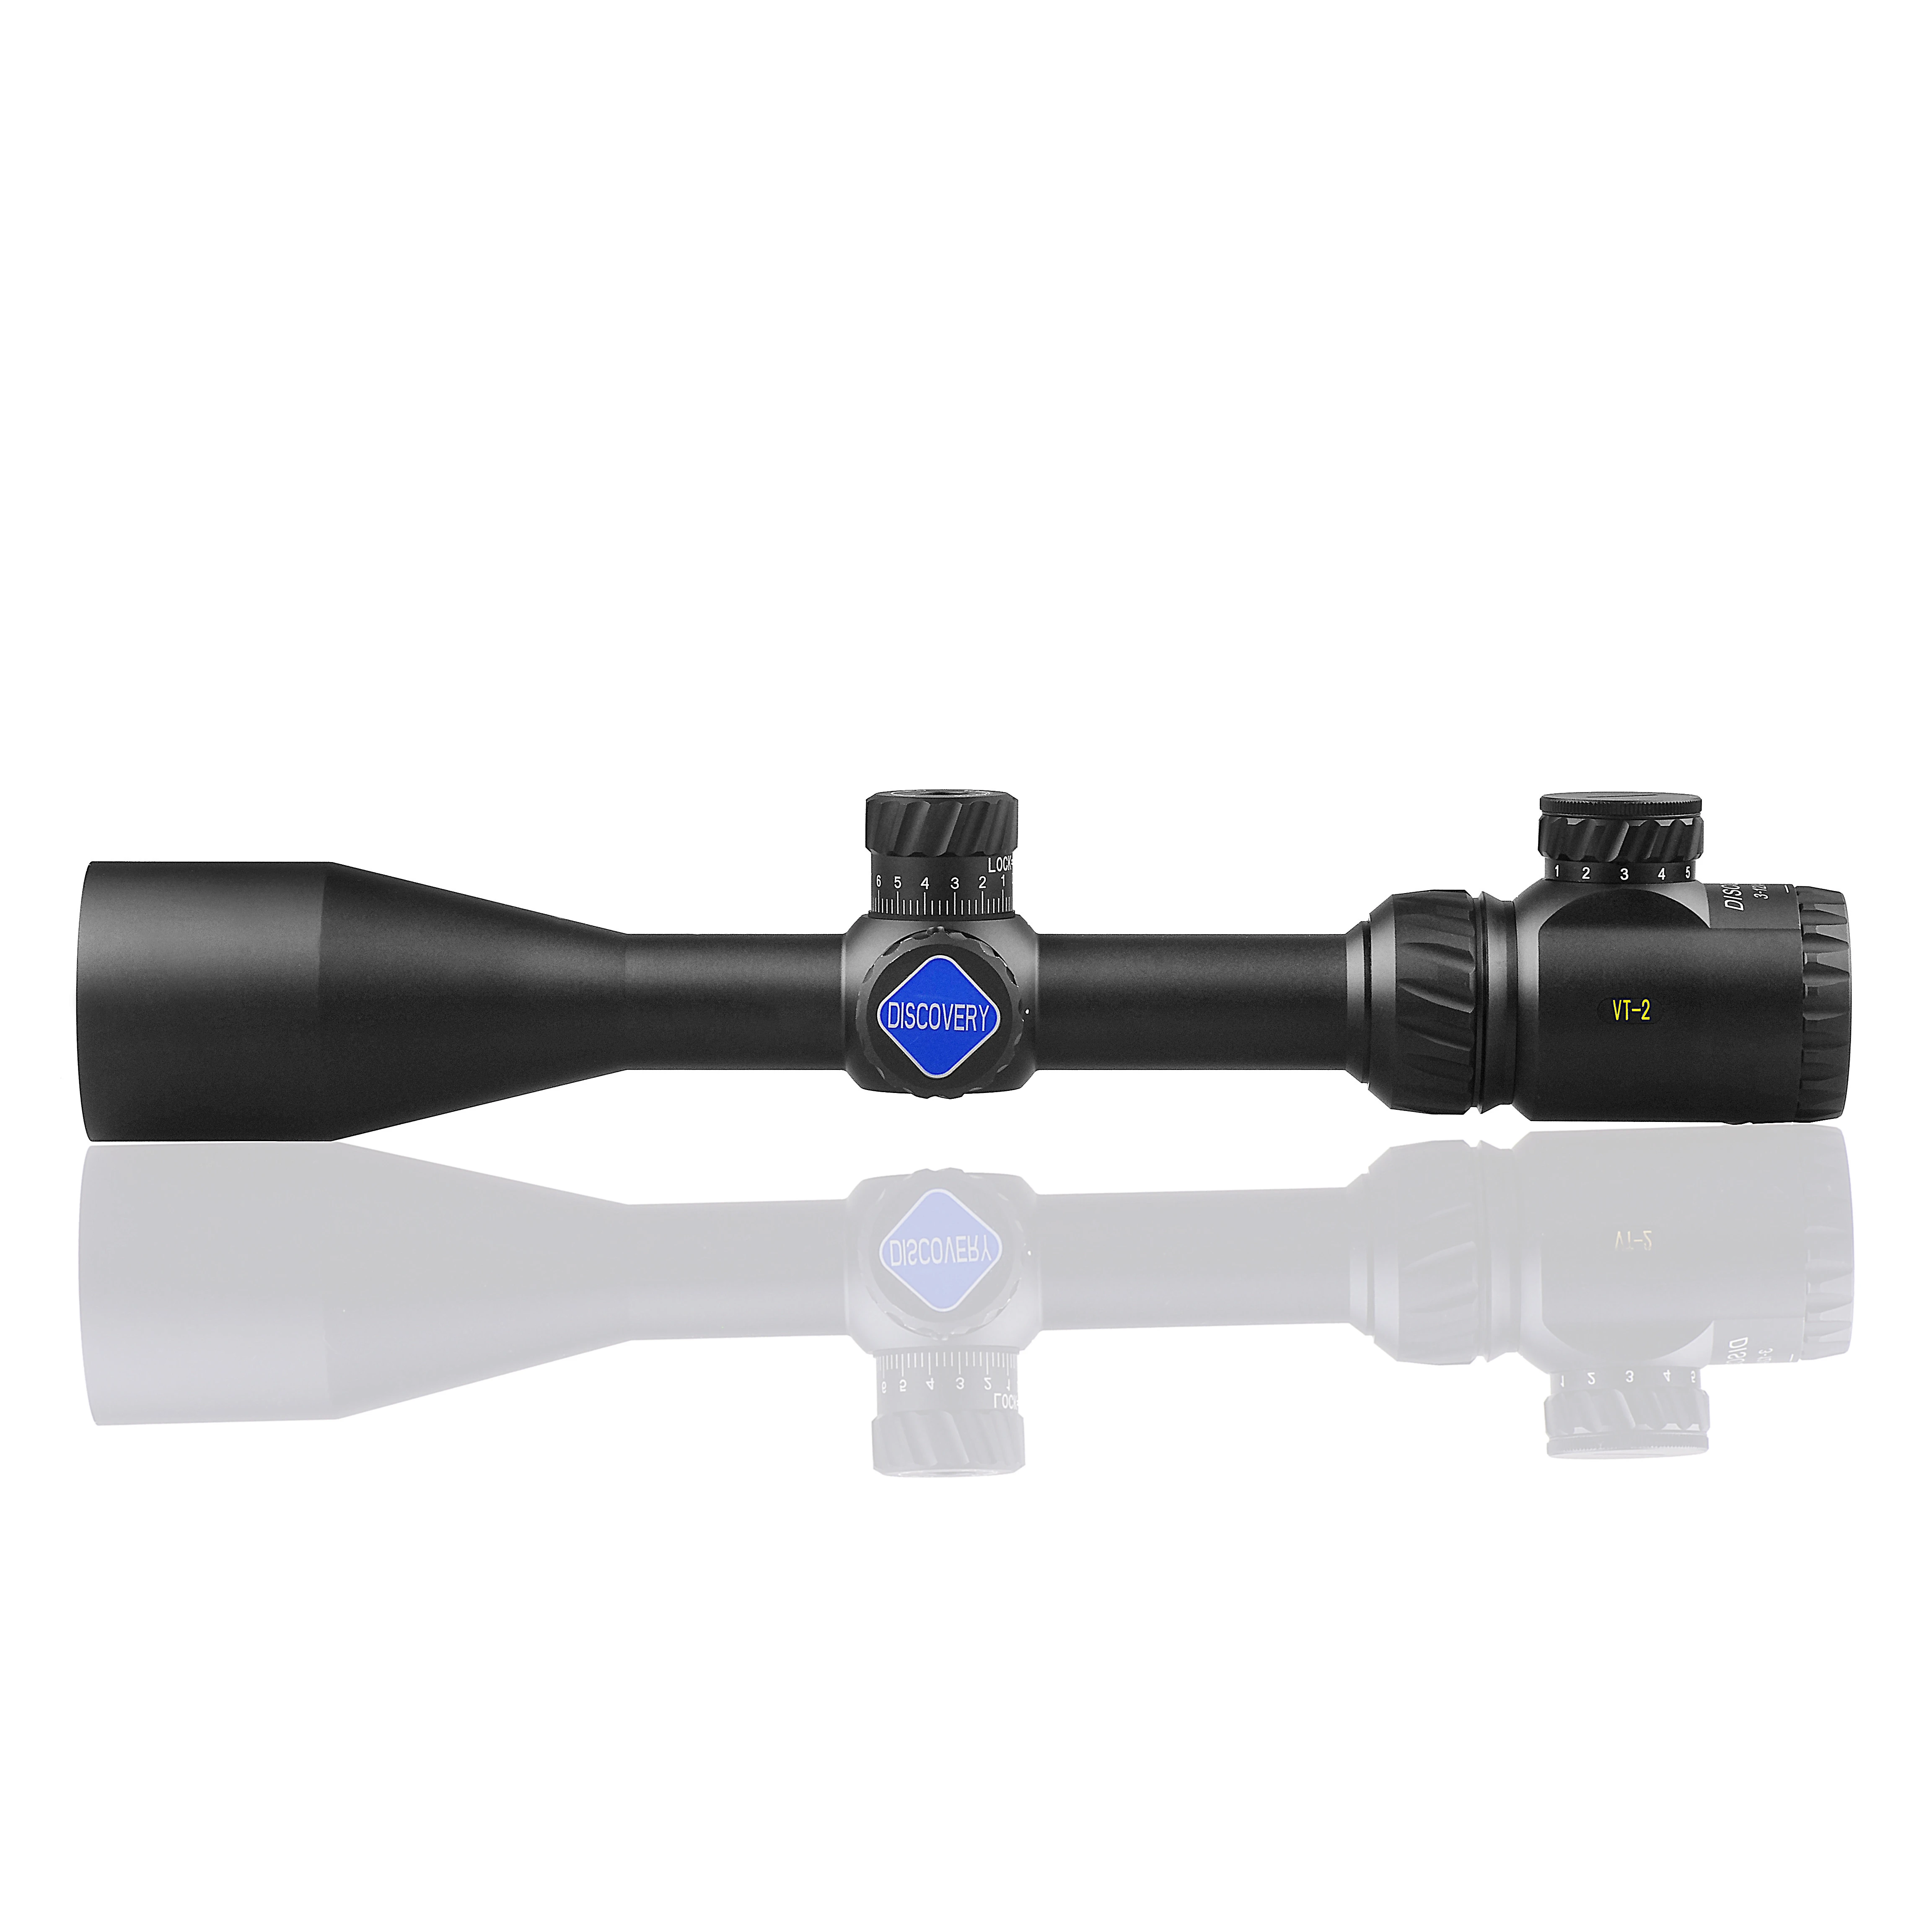 Discovery Custom Optical VT-2 3-12X44SFIR Air Gun Weapons Hunting Equipment Scope with 35mm Monotube Sniper Riflescope